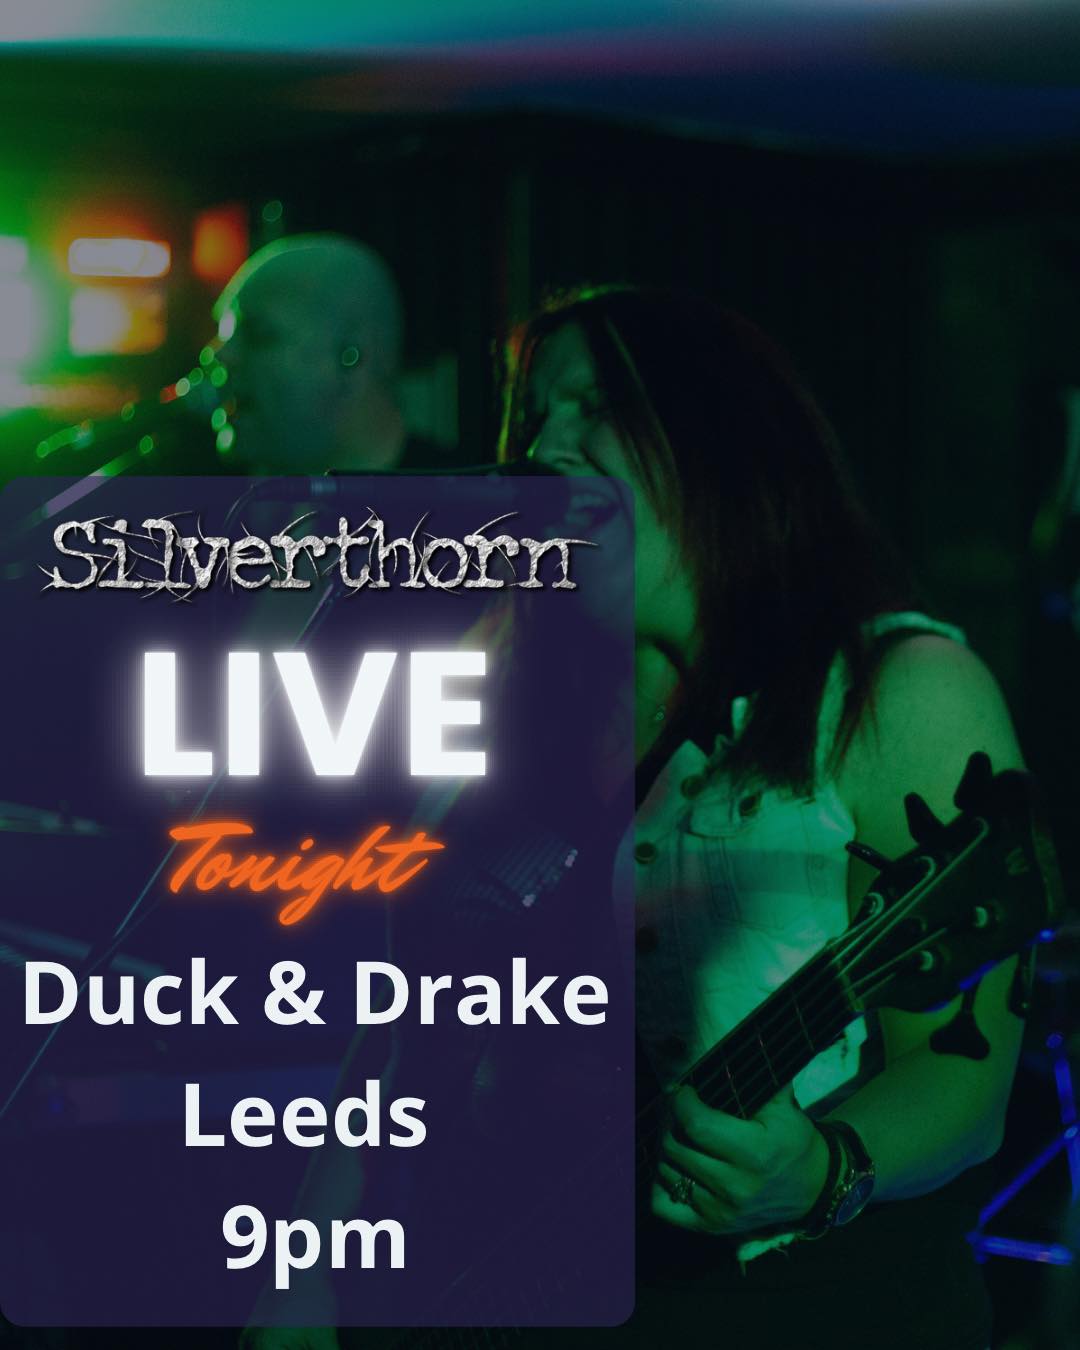 See you tonight at the Duck and Drake in Leeds!

#rock #coverband #silverthorn #rocknroll #livemusic #livemusicisbetter #silverthornrock #livemusicislife #rockmusic #LiveMusicIsBack #rockandroll #stadiumrock